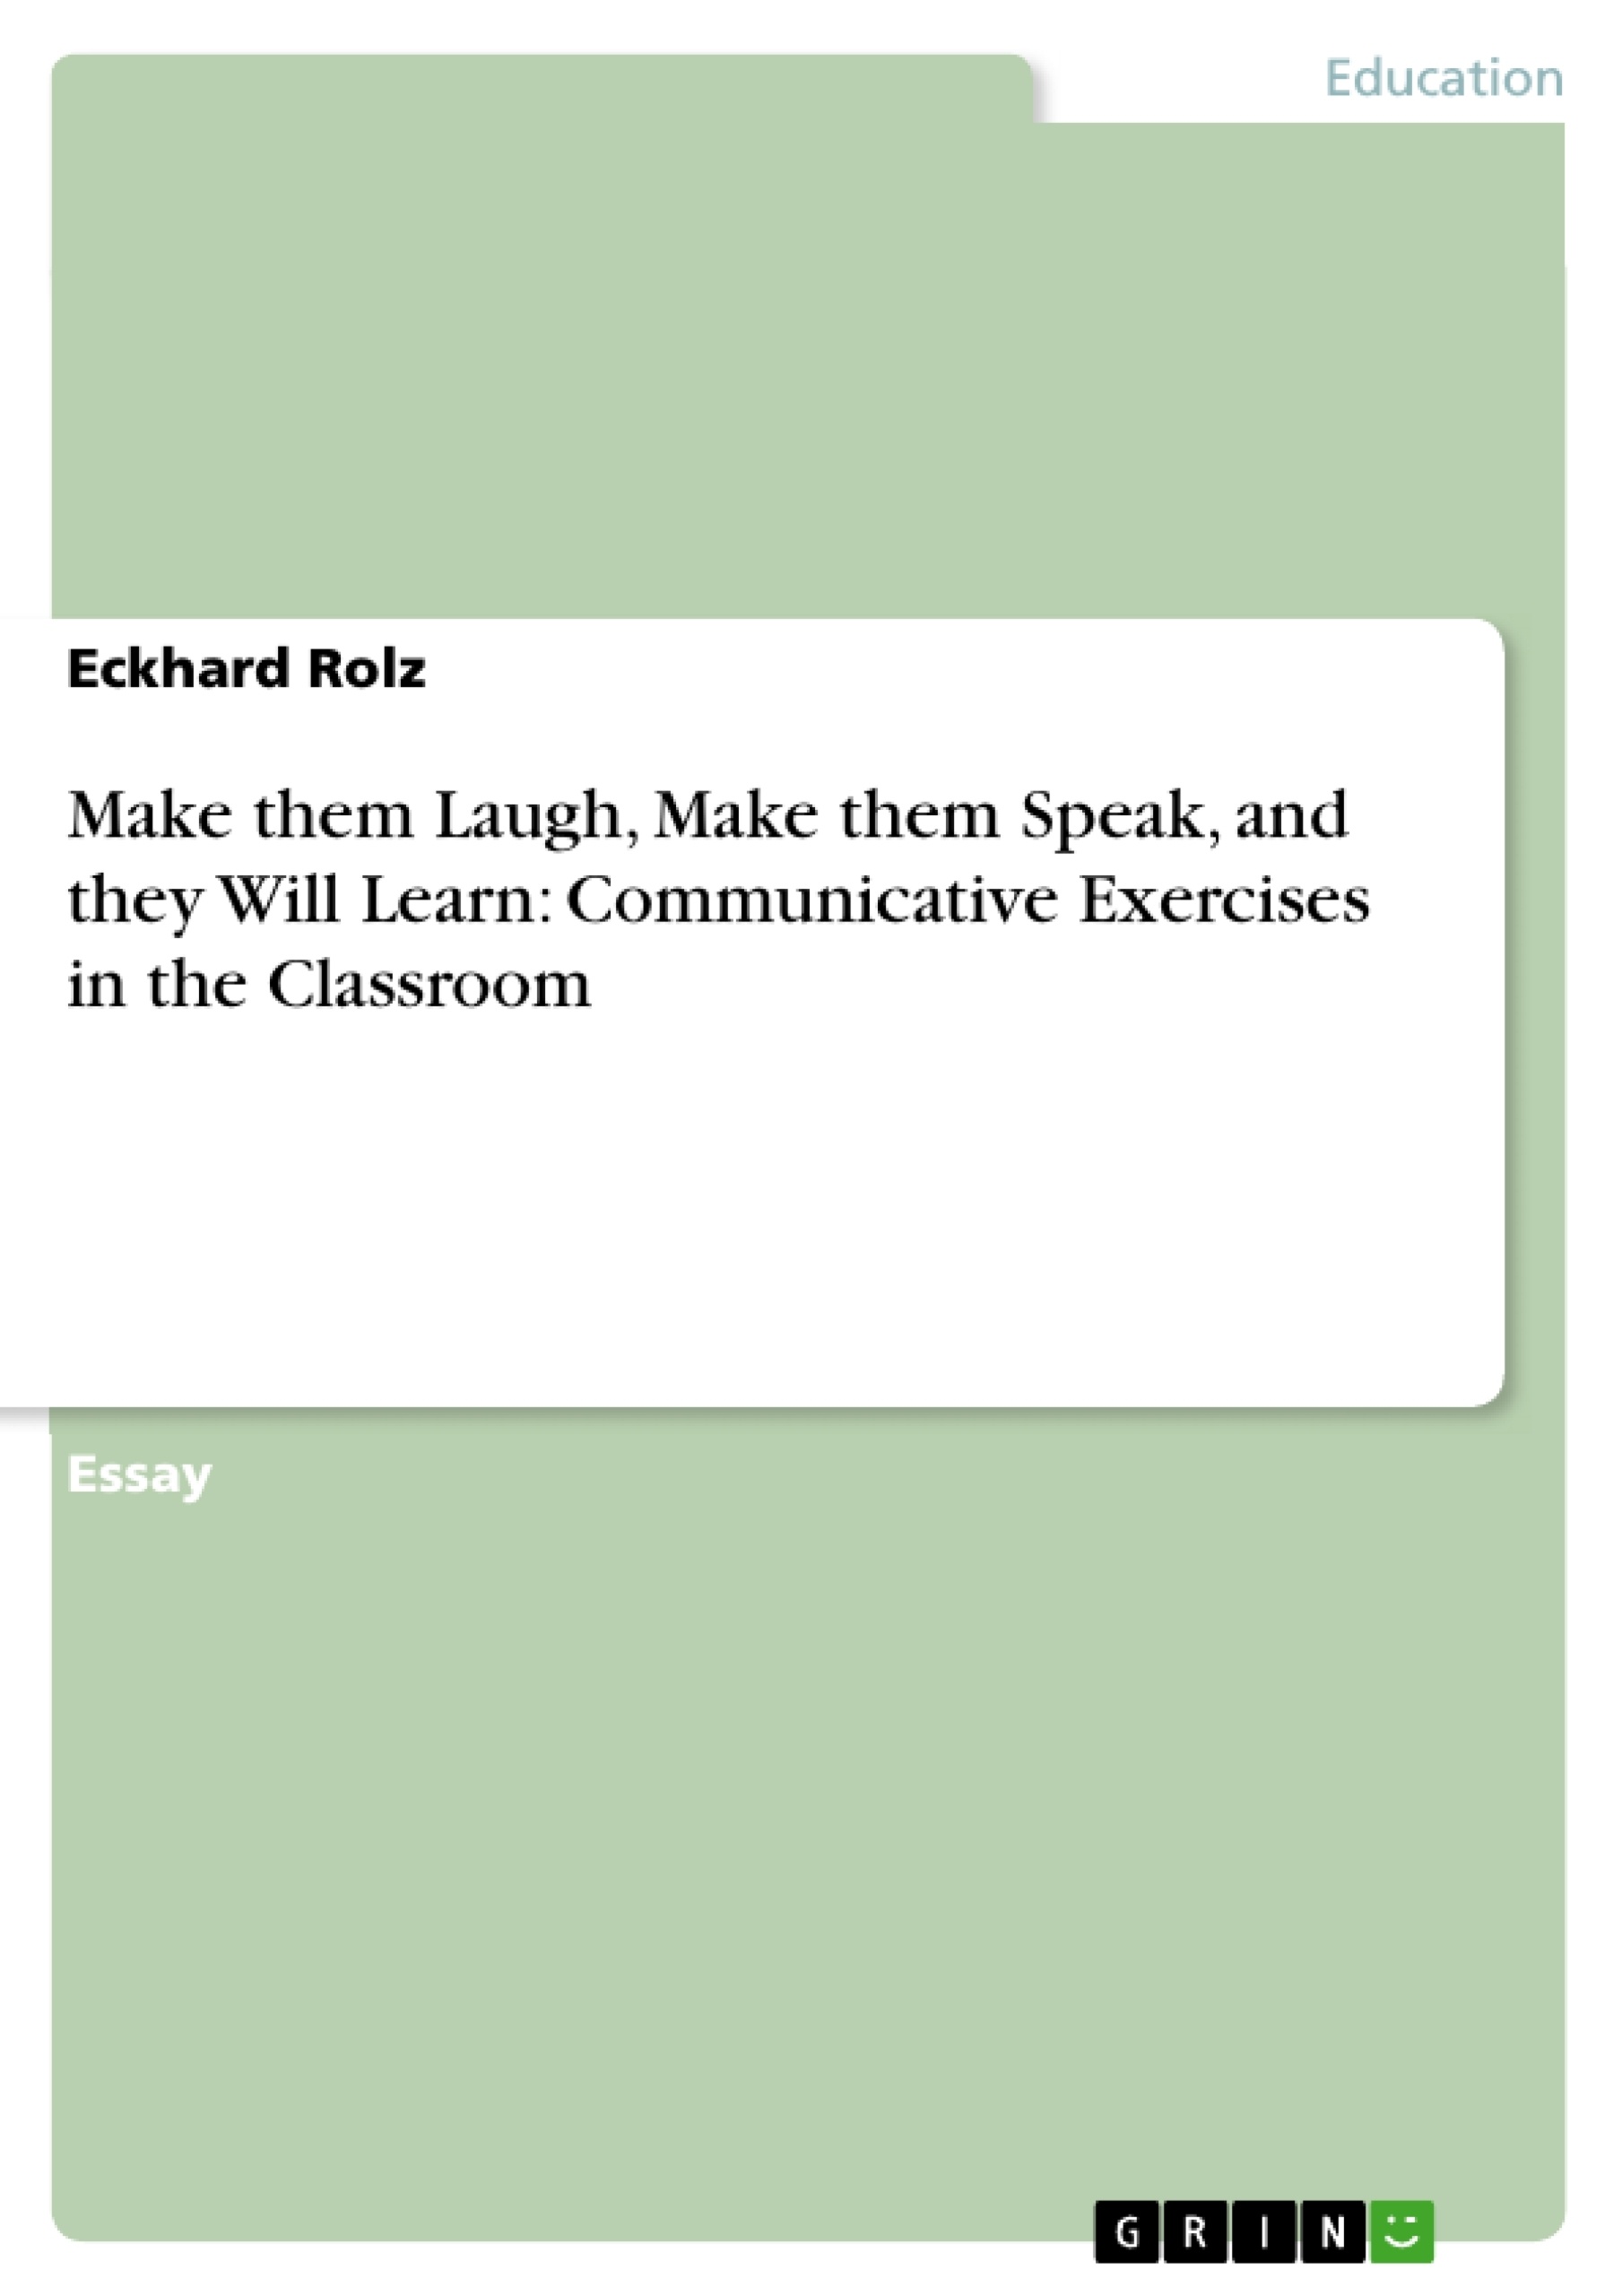 Title: Make them Laugh, Make them Speak, and they Will Learn: Communicative Exercises in the Classroom